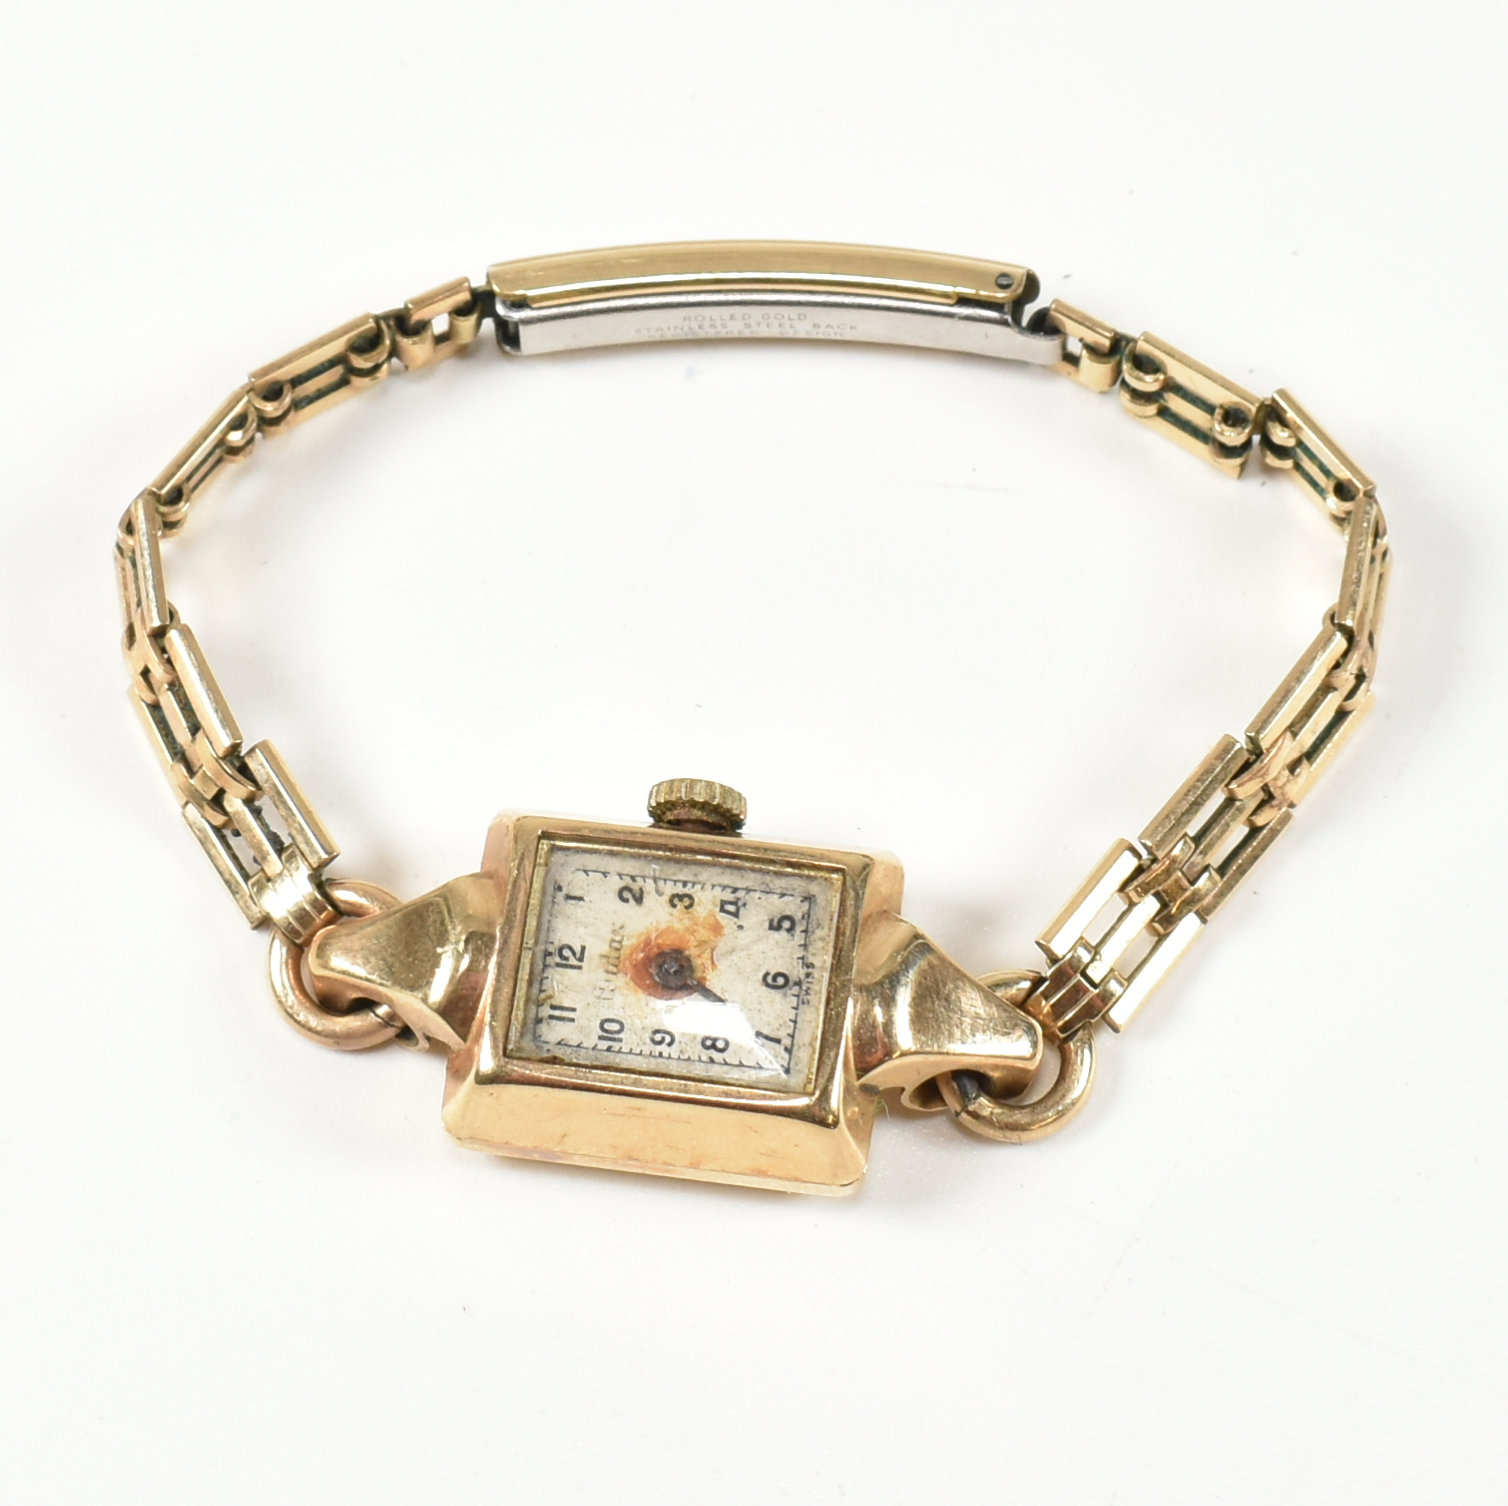 HALLMARKED 9CT GOLD AUDAX LADIES DRESS WATCH WITH ROLLED GOLD BRACELET - Image 2 of 7